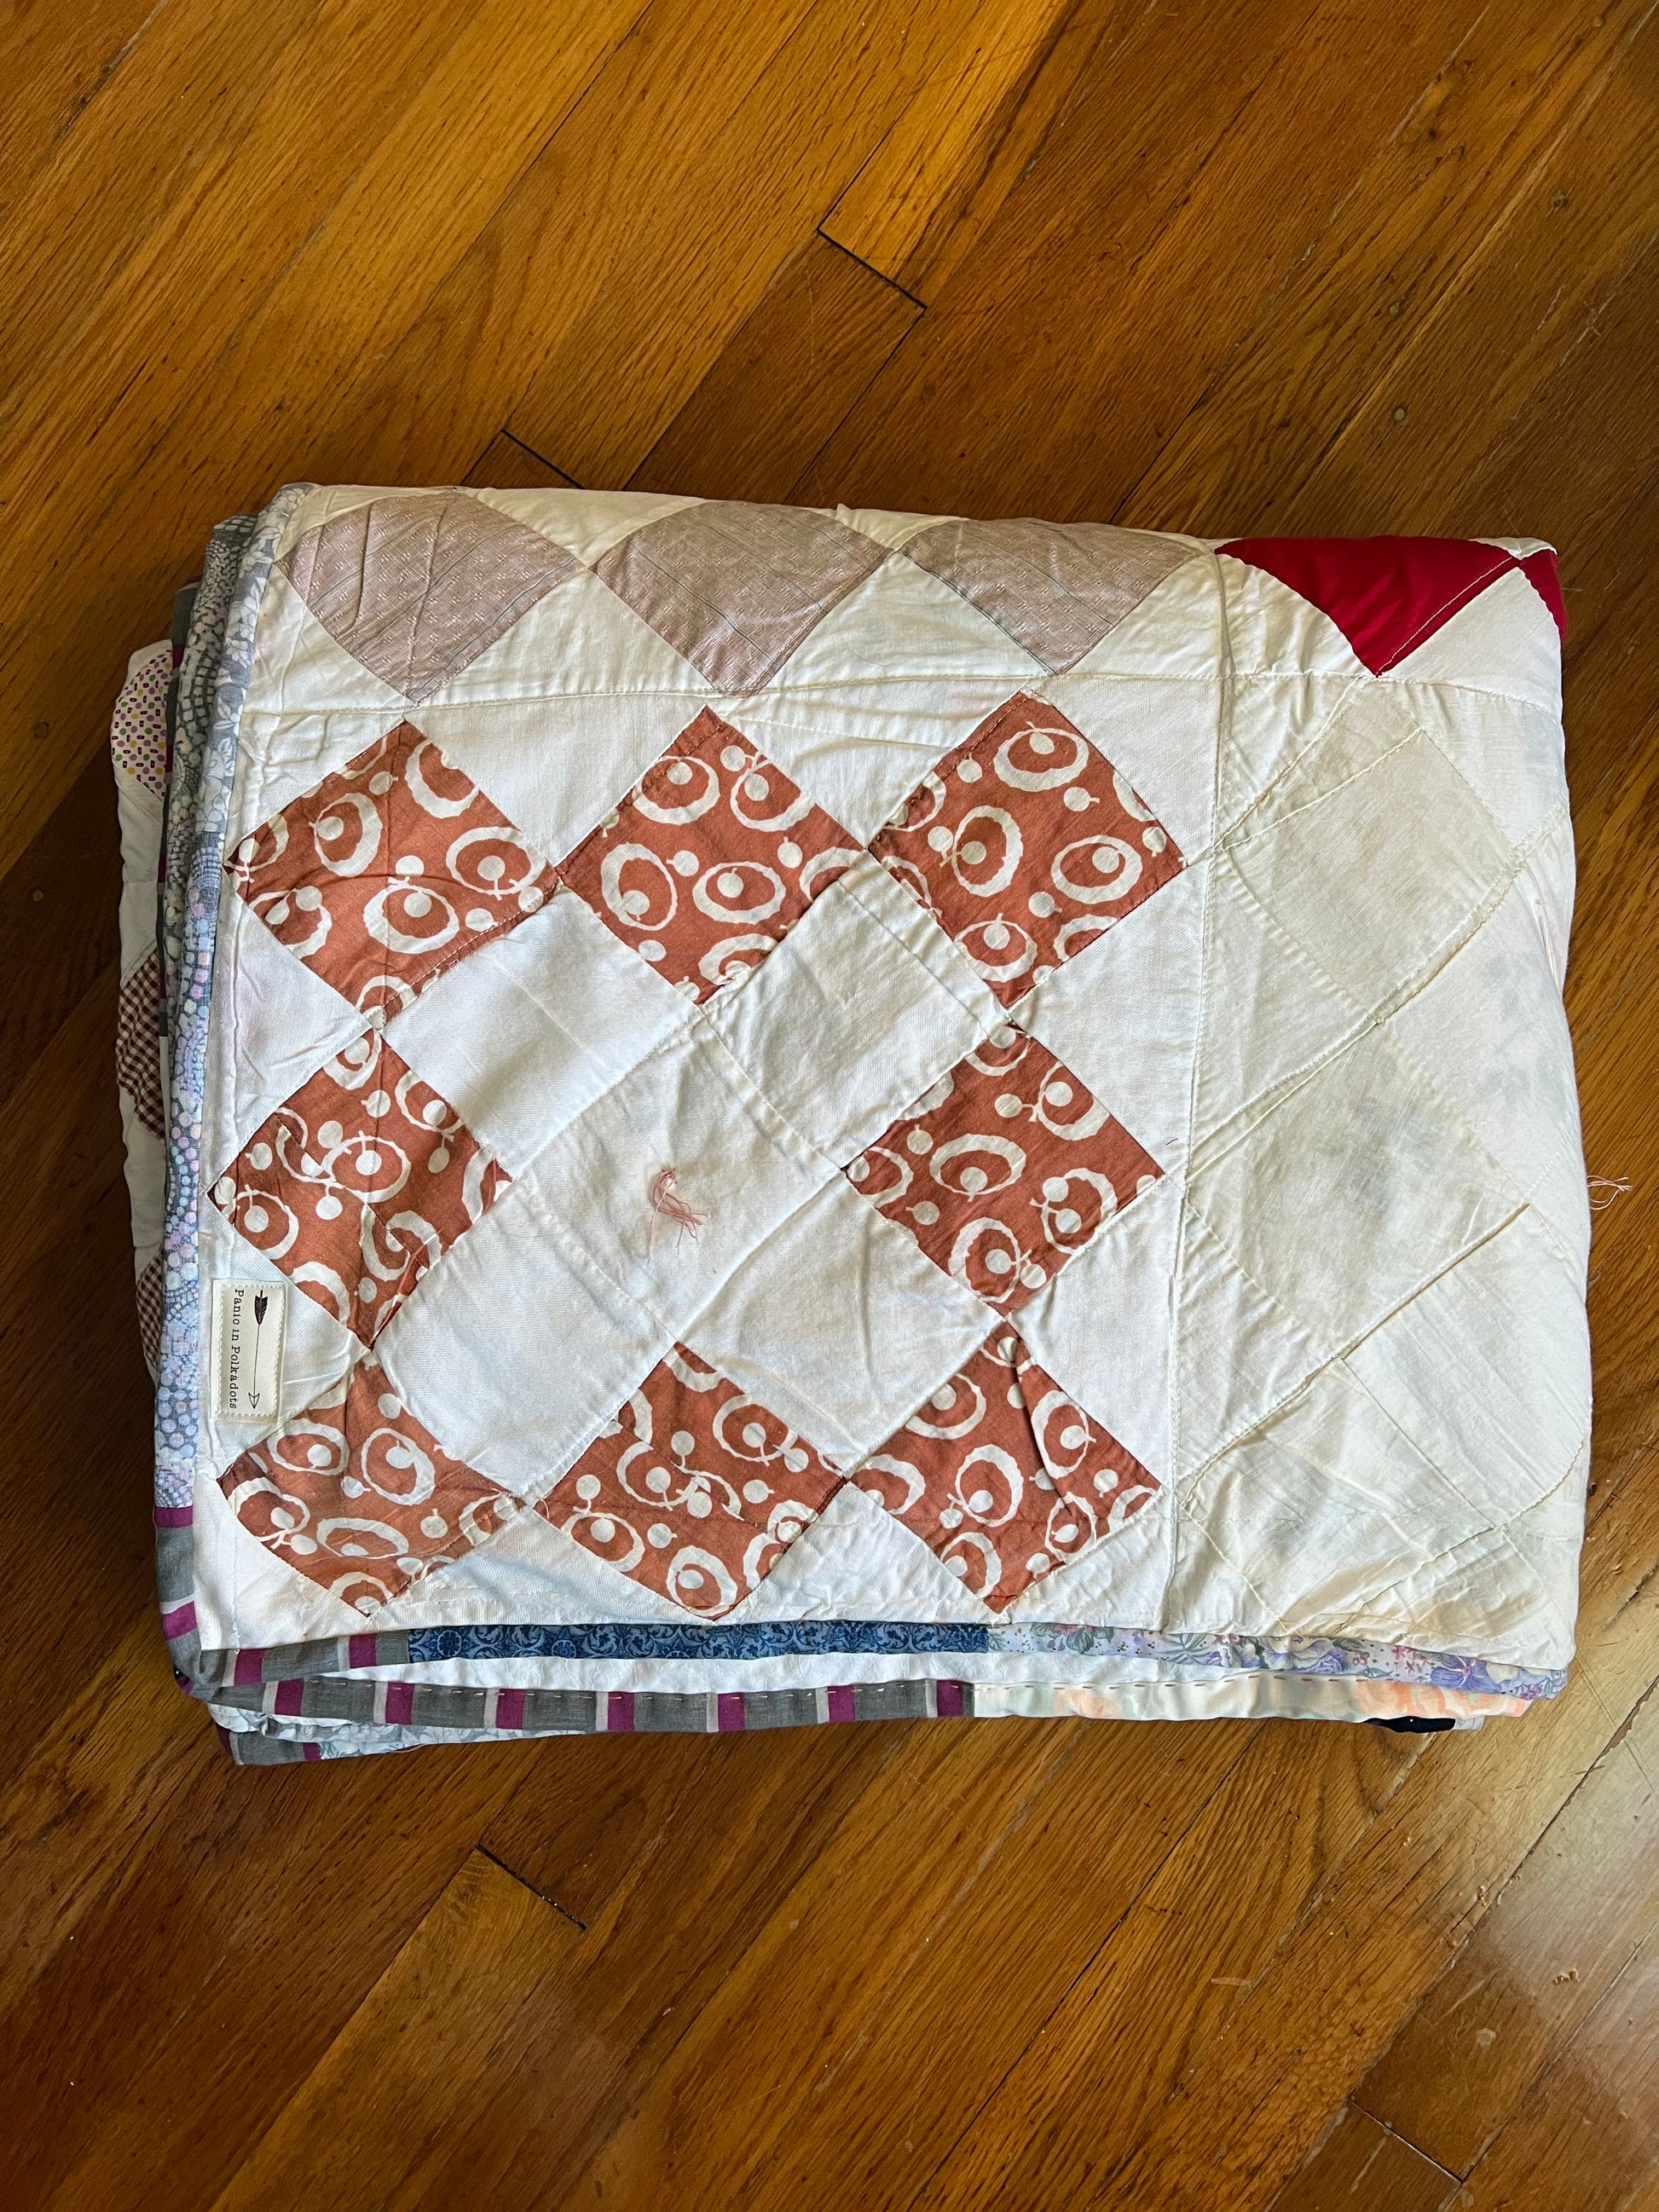 the quilt is folded neatly, and lays on top of a wood floor